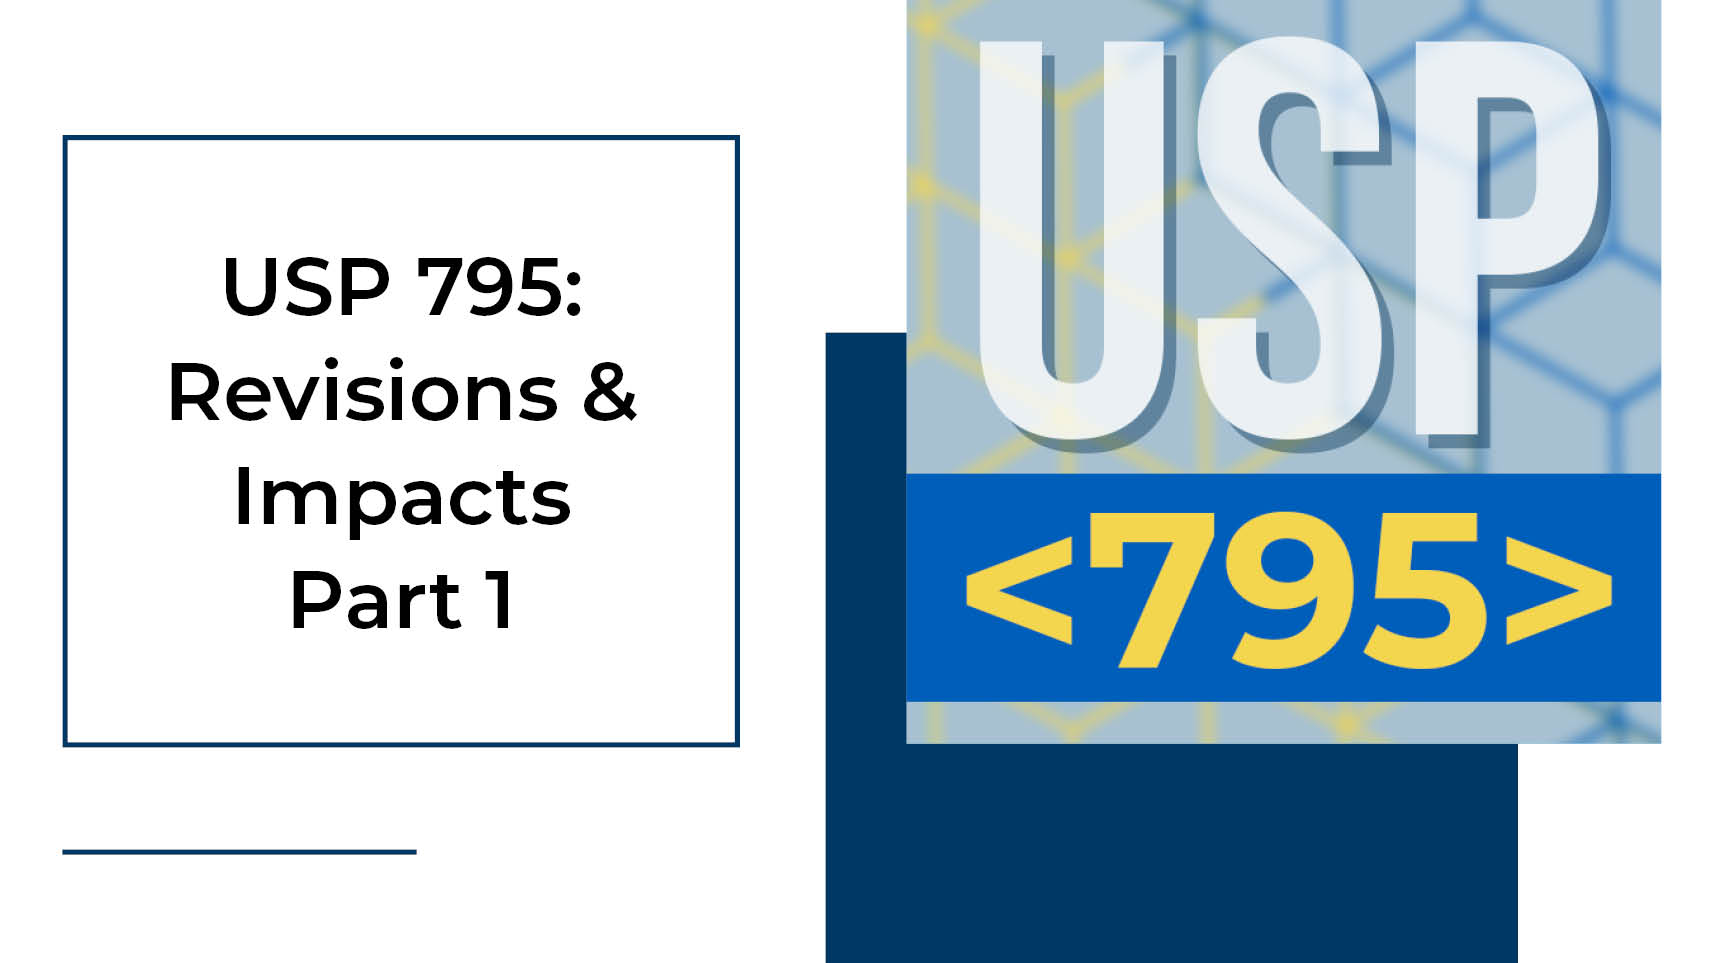 THE PCCA BLOG USP 795 Revisions & Impacts, Part 2